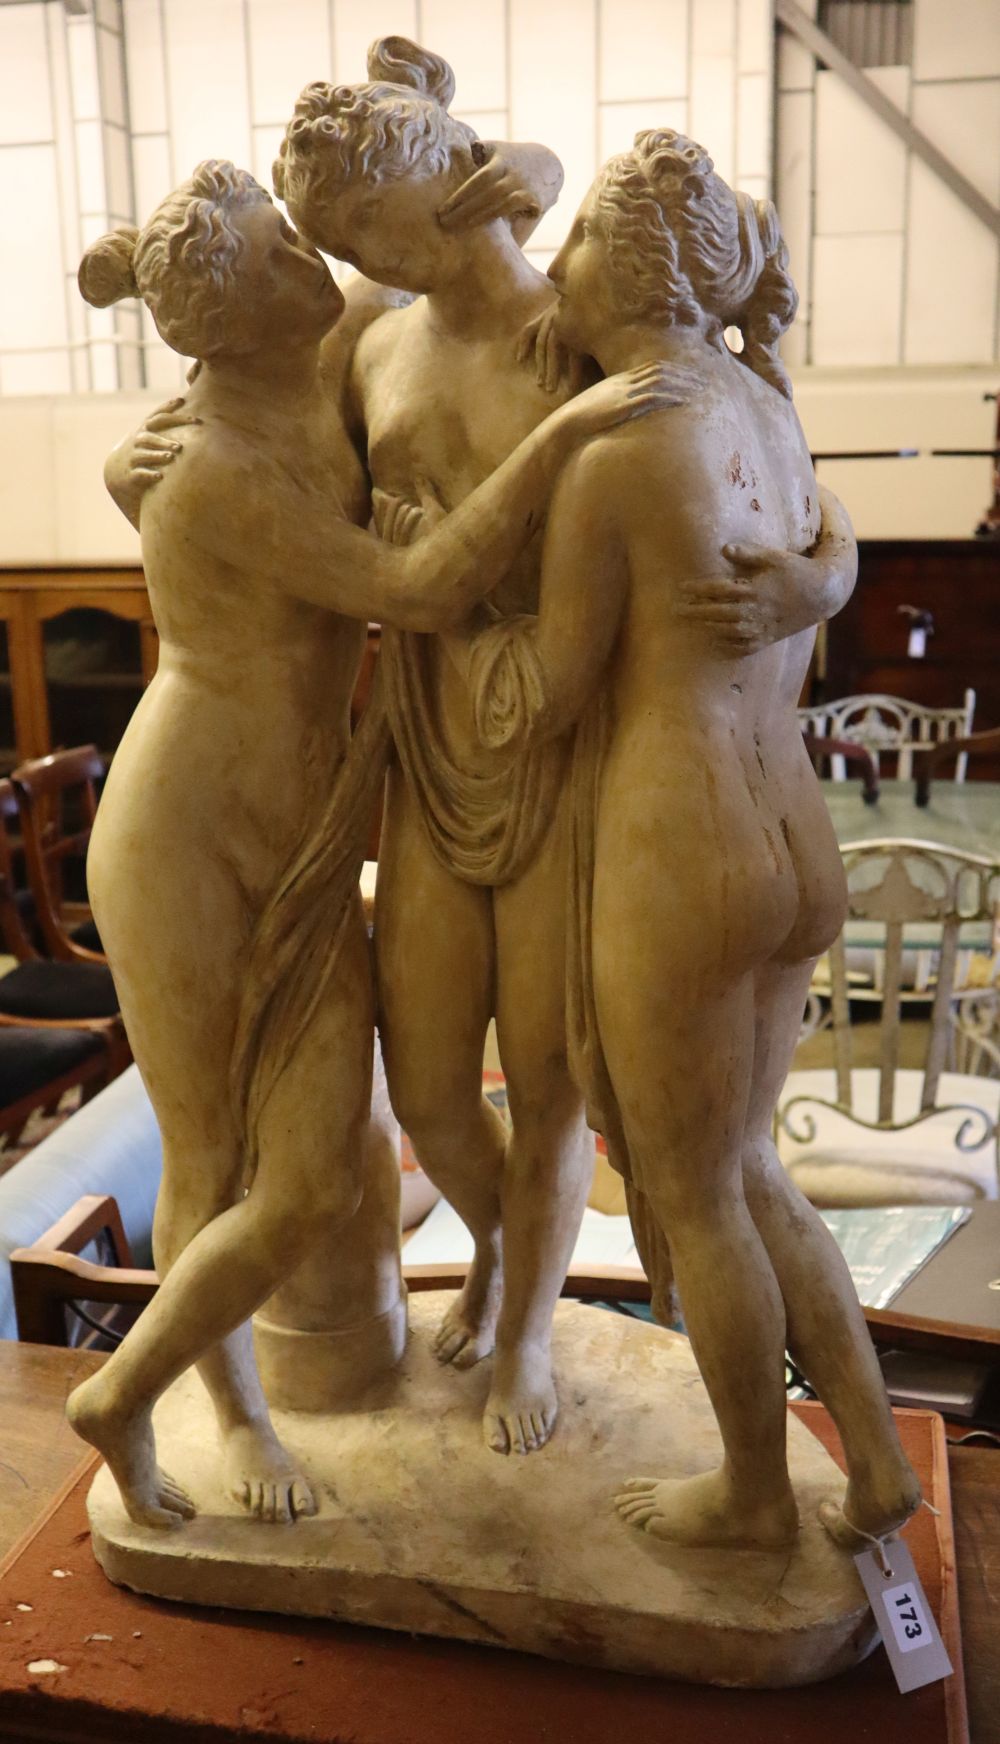 A plaster group of The Three Graces, height 83cm